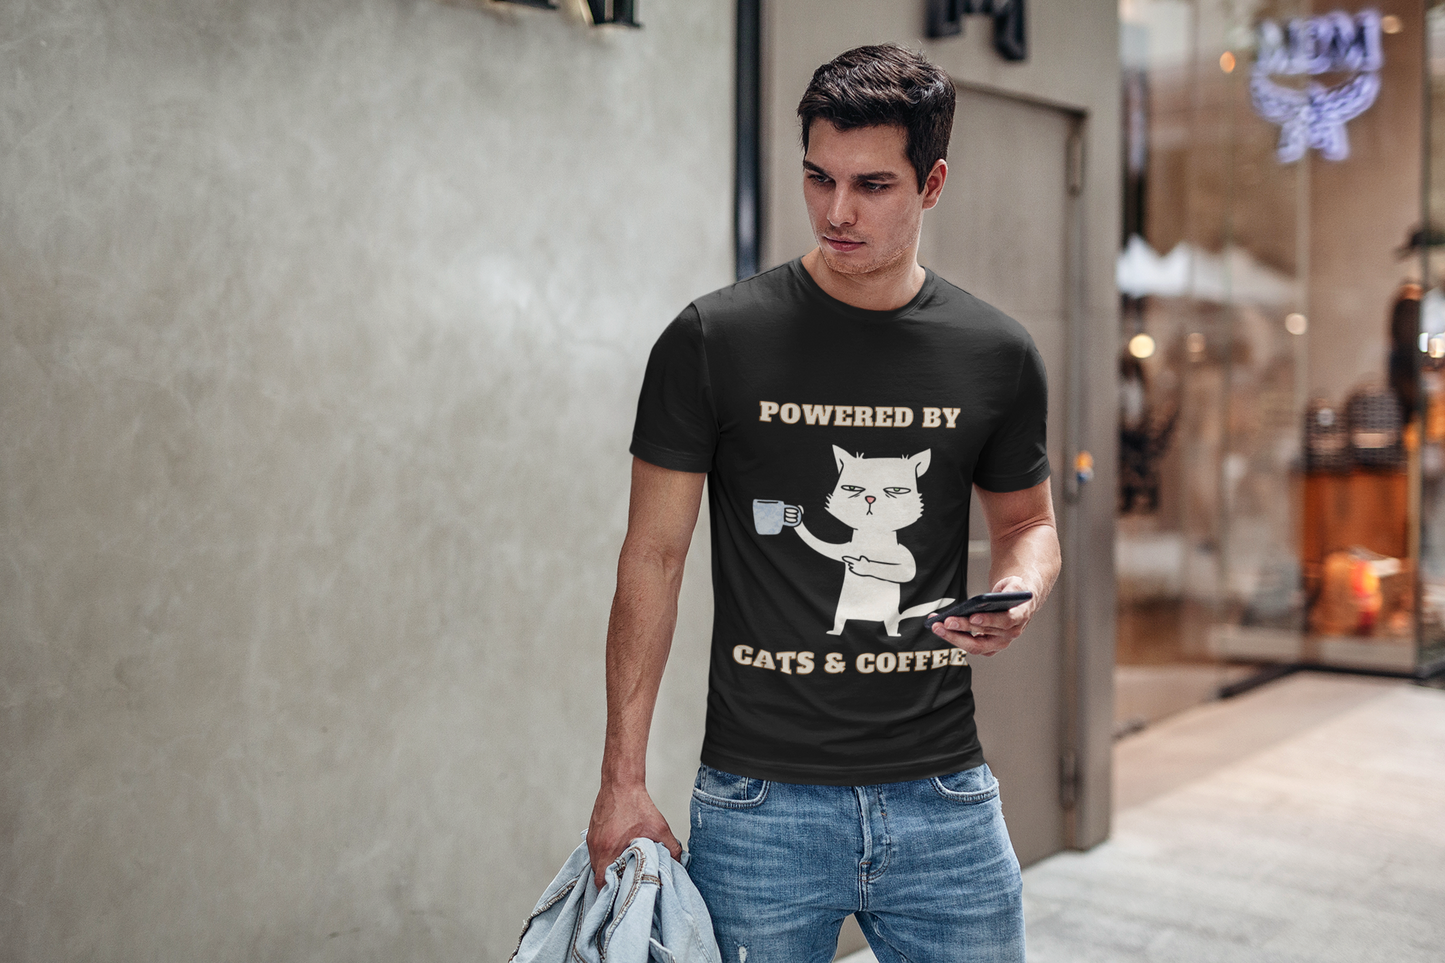 Max Cats and Coffee T shirt Unisex Crewneck